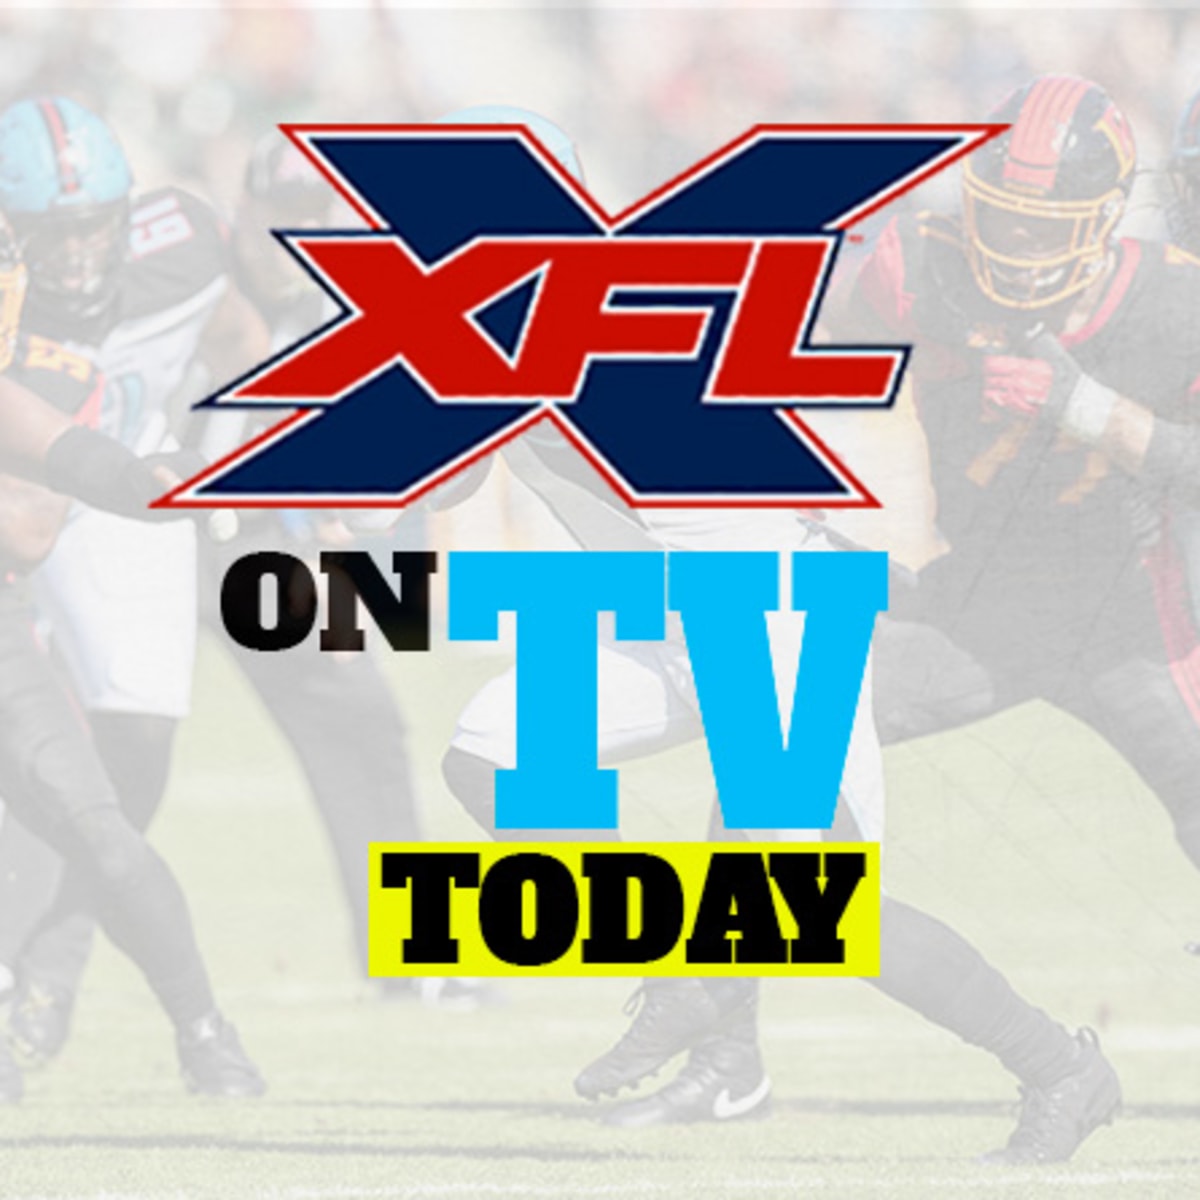 XFL Football Games on TV Today (Sunday, March 1) 